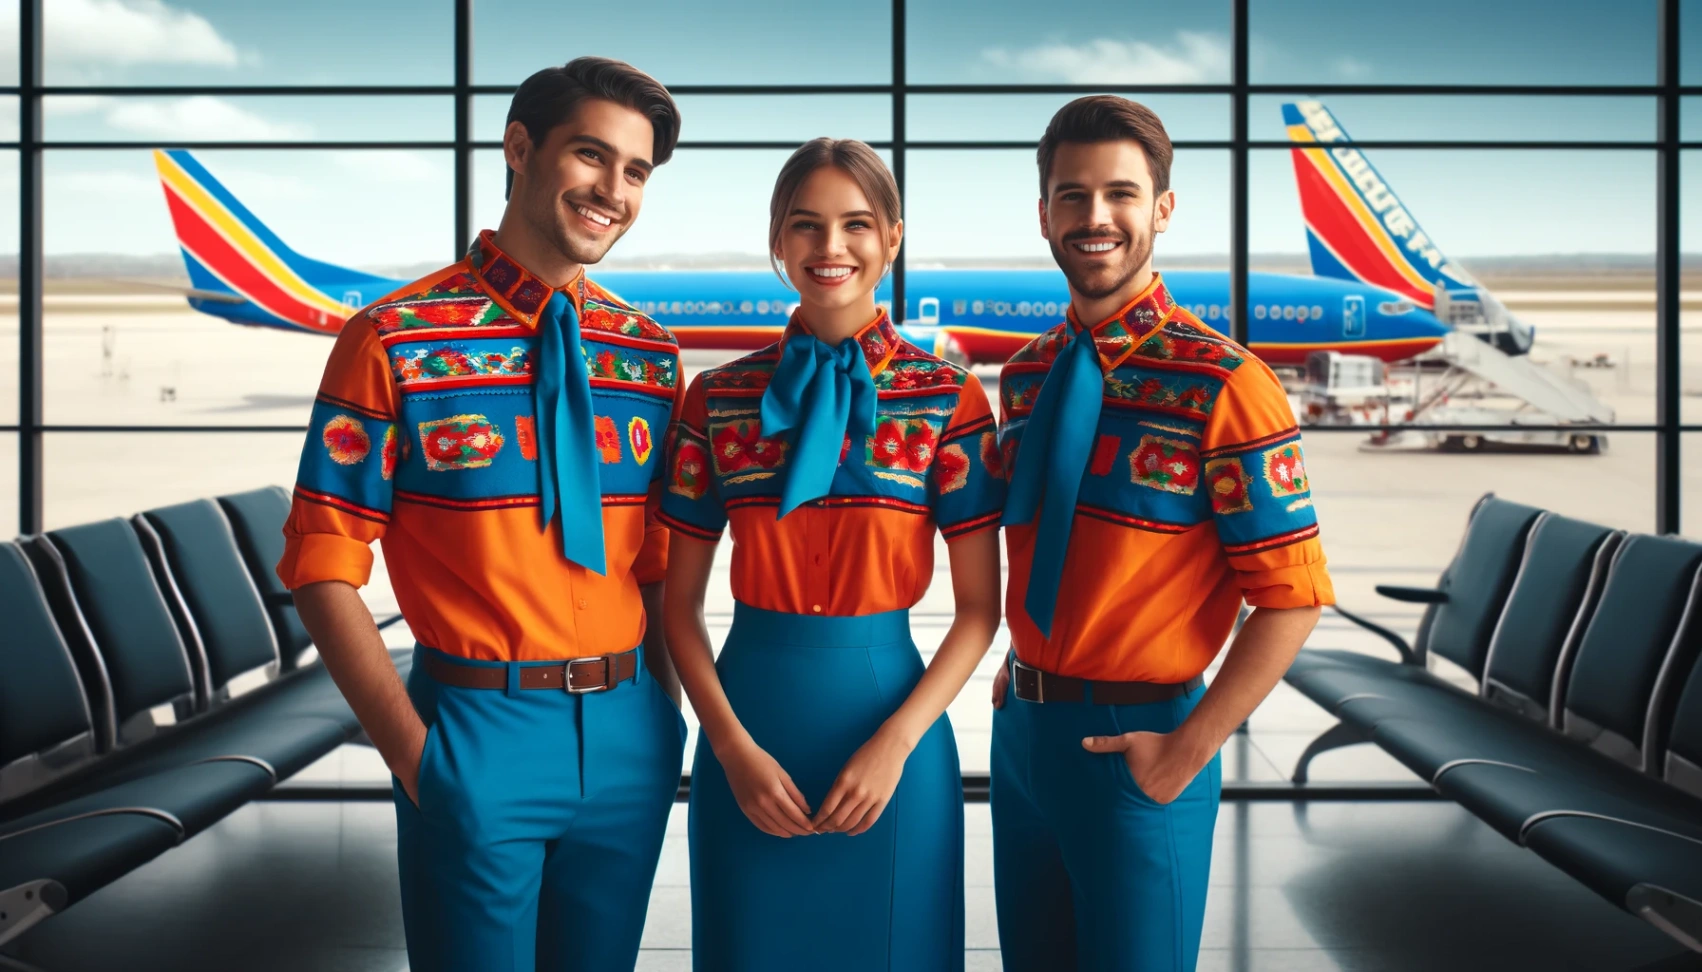 Southwest Airlines Employment: Your Guide to Applying